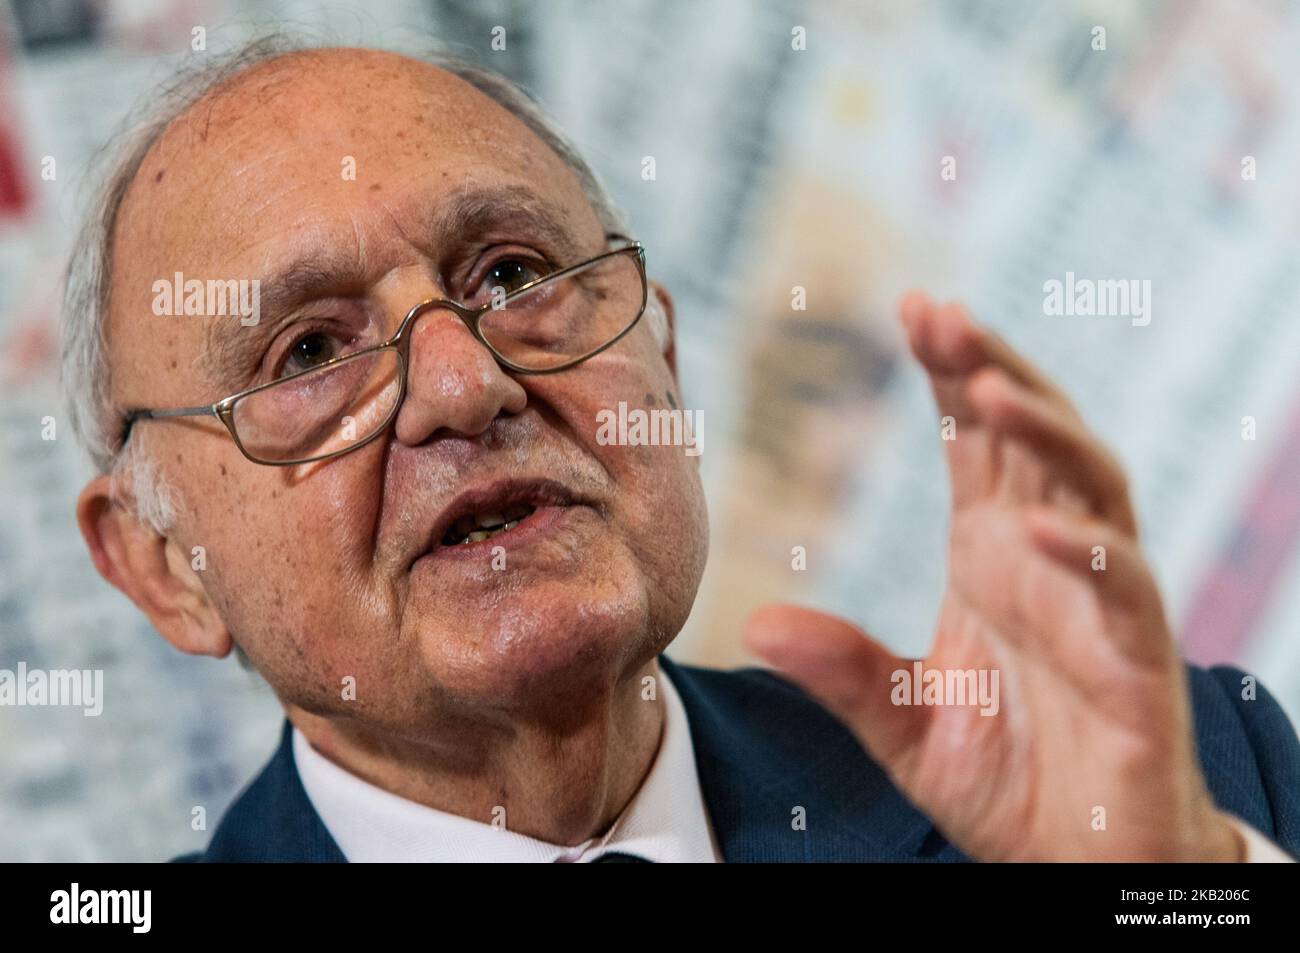 Conference of the Minister of European Affairs Prof. Paolo Savona to the foreign press 'A polytheia for a different, stronger and fairer Europe'. on October 8, 2018 in Rome, Italy (Photo by Andrea Ronchini/NurPhoto) Stock Photo